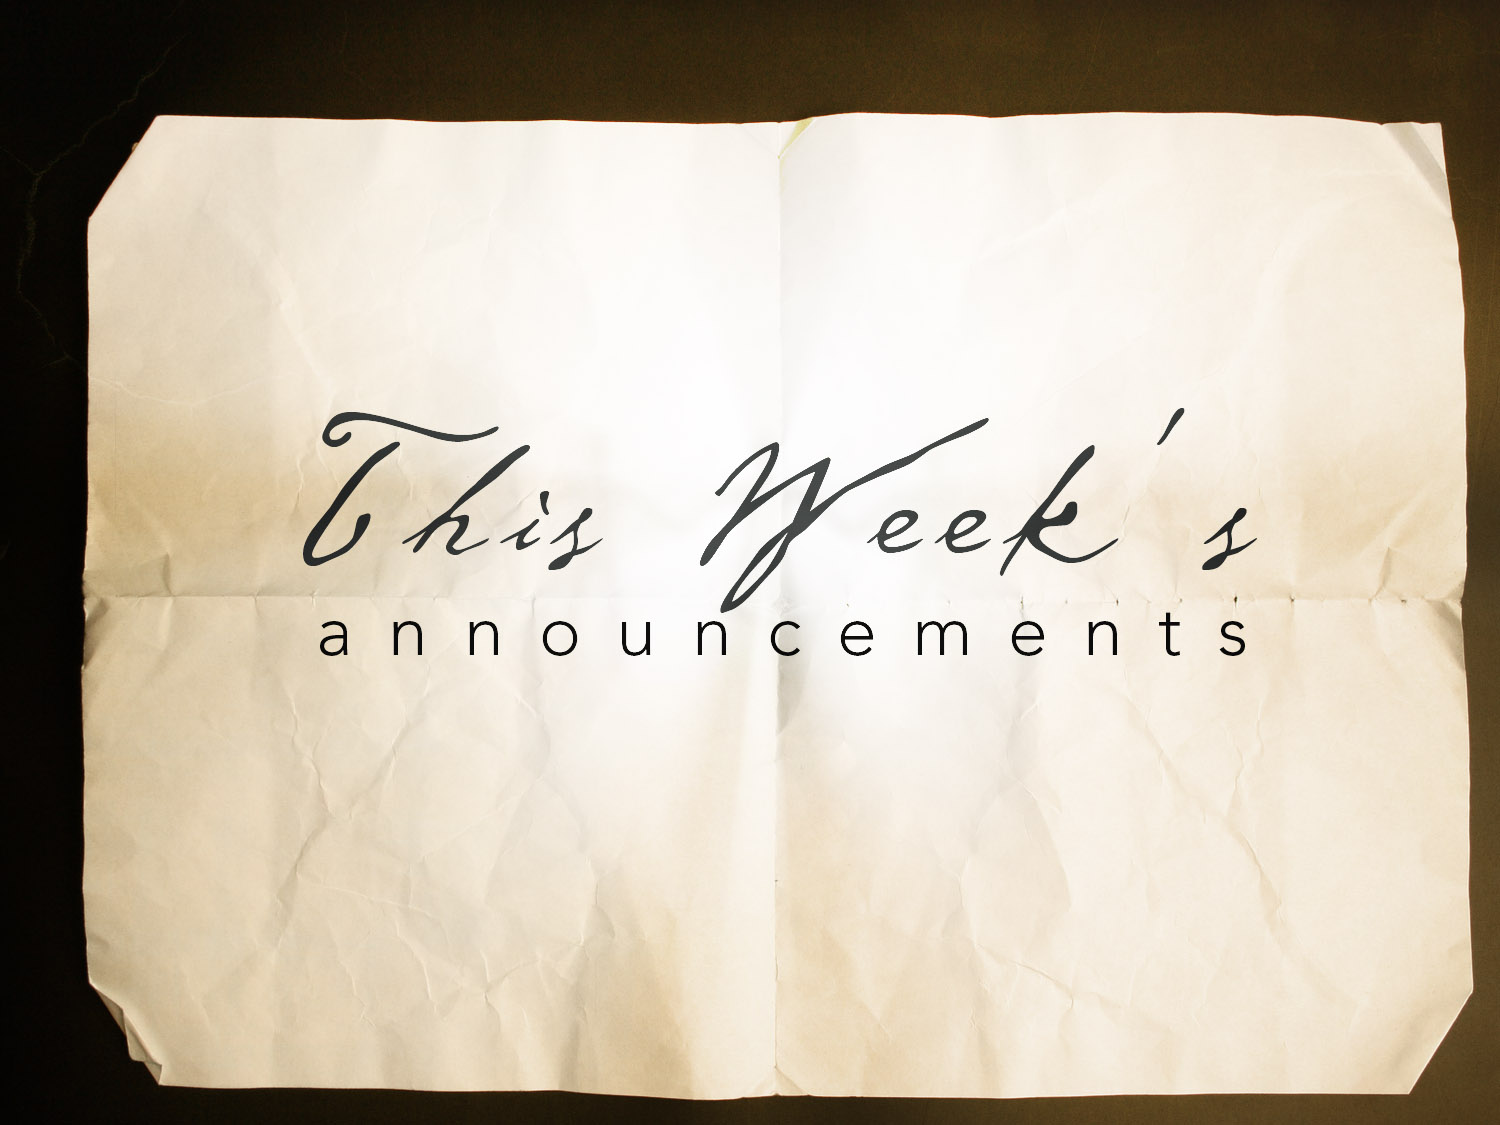 This Week's announcements